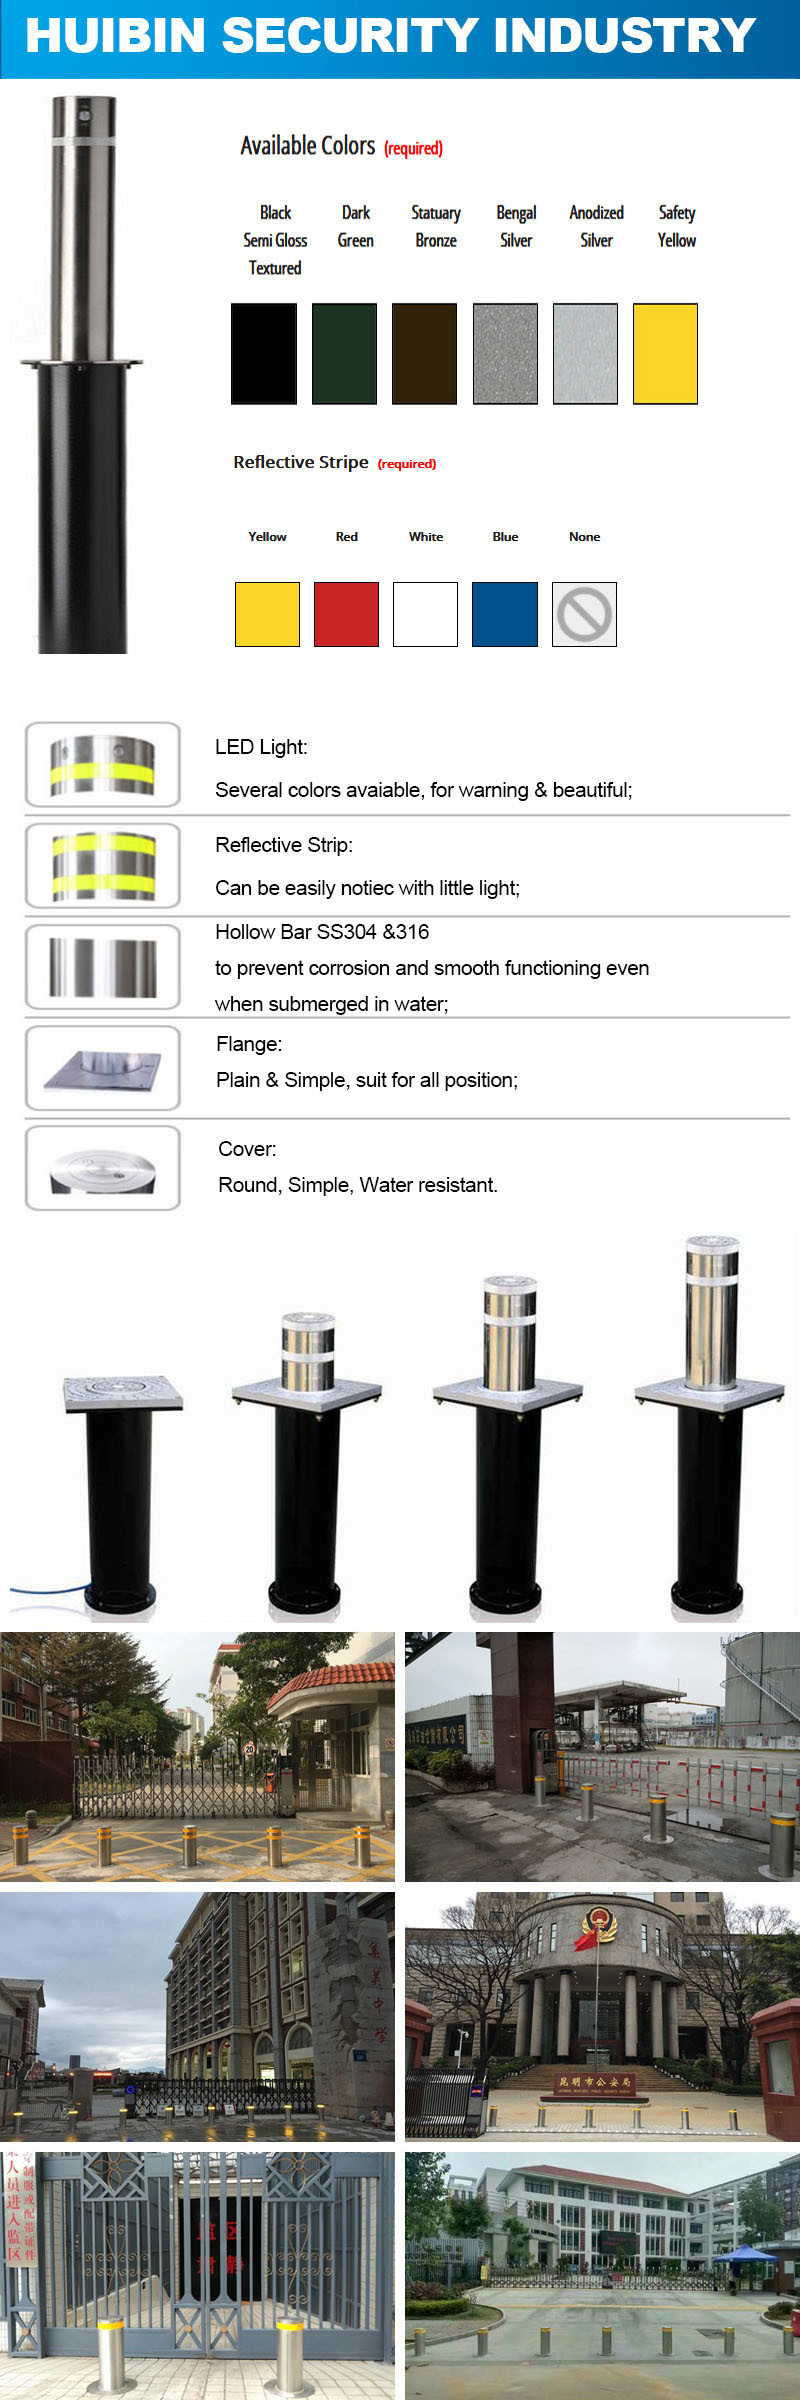 2018 Newest Safety Product Automatic Lifting Bollard with Solar Light